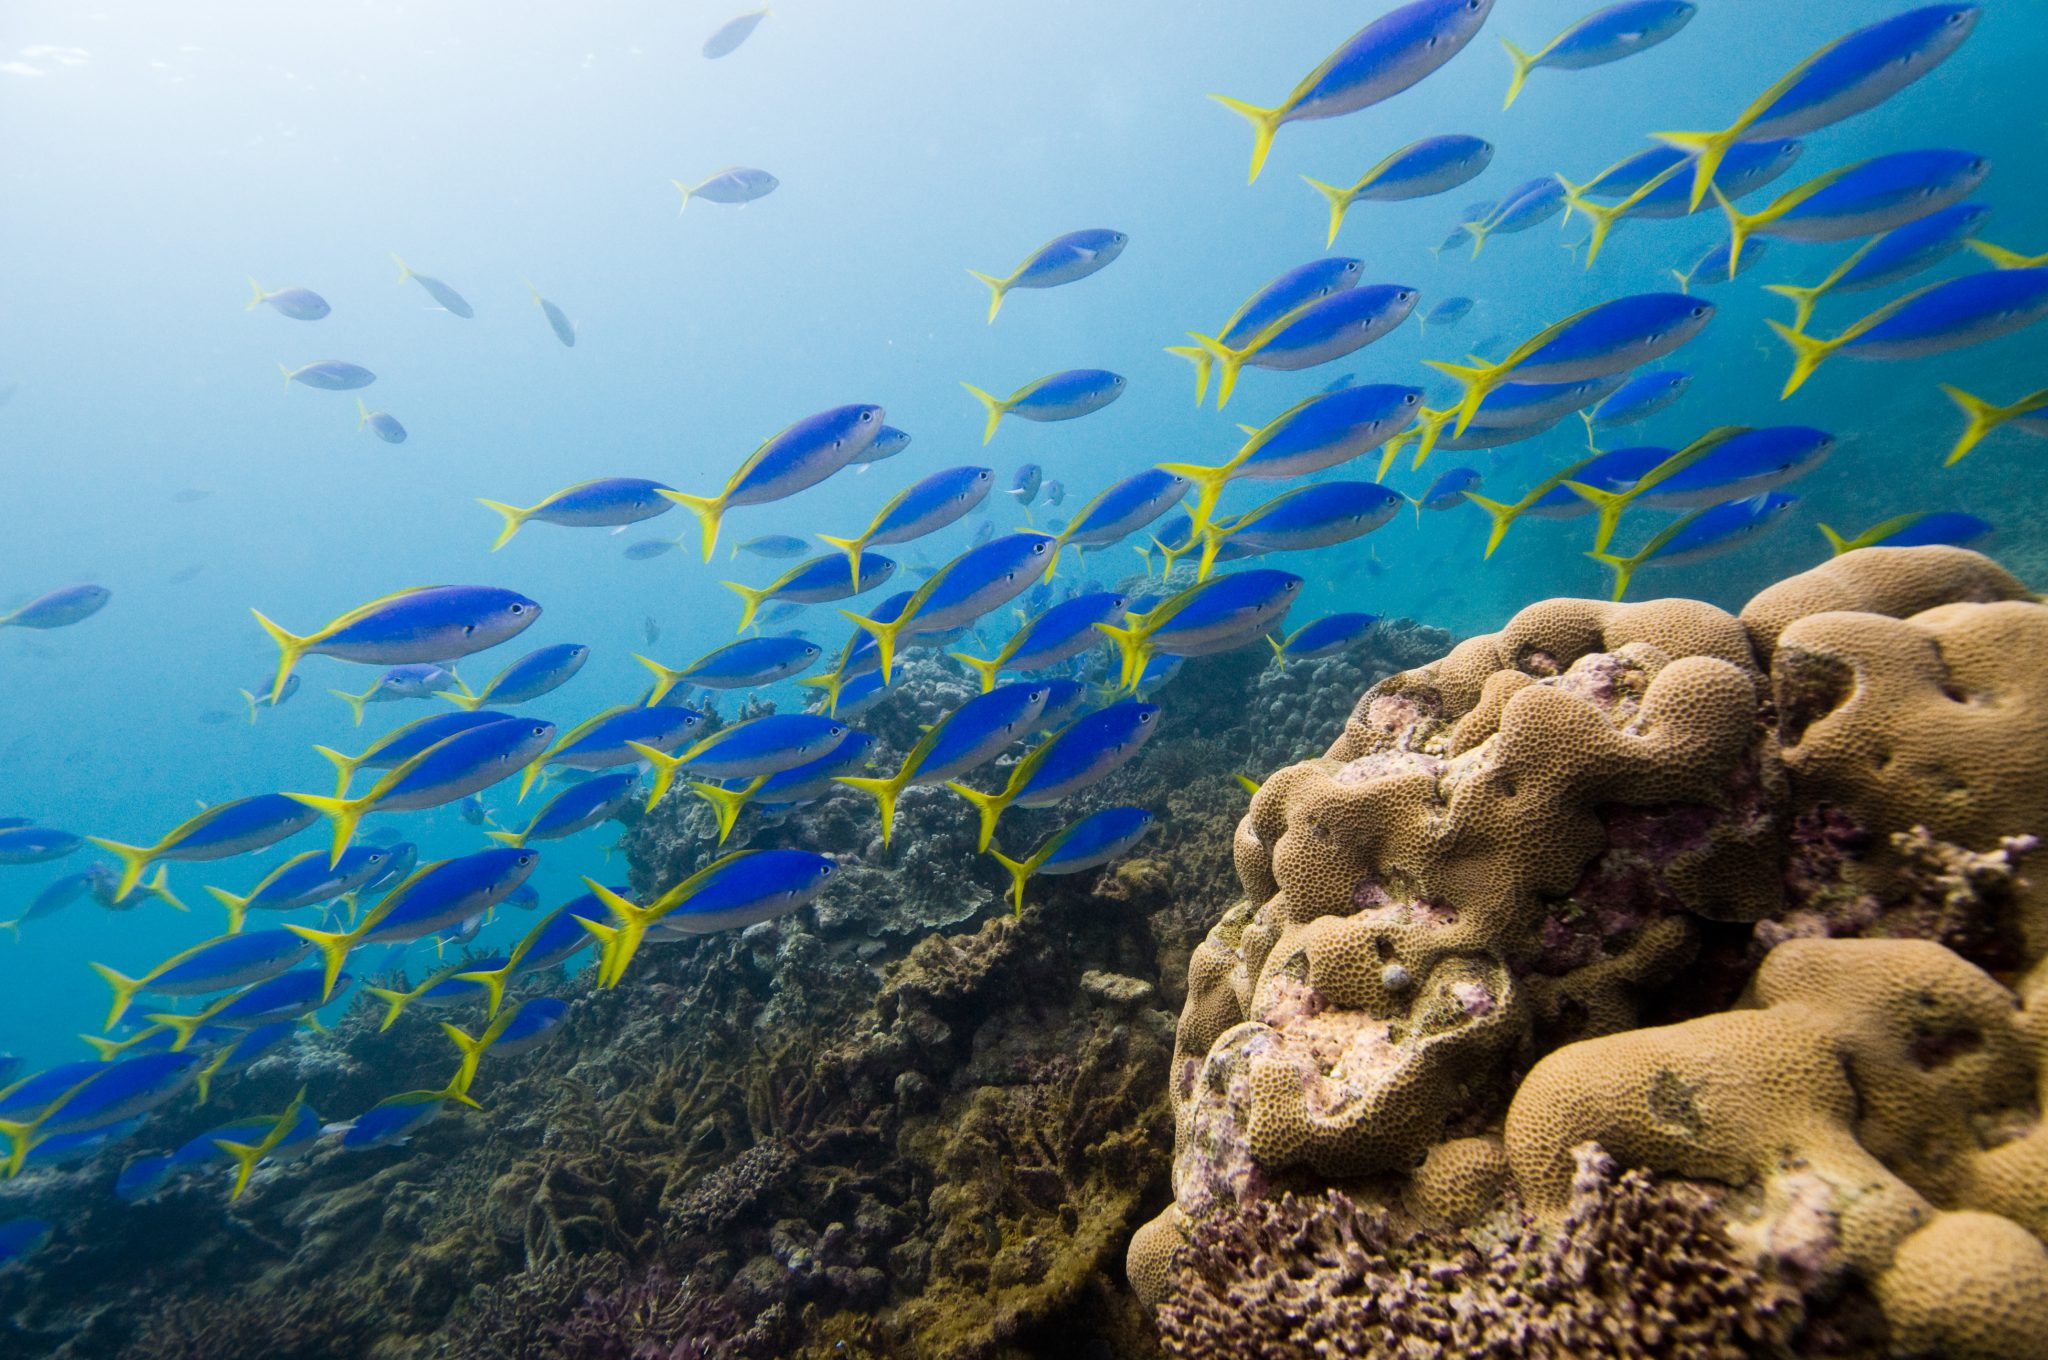 Yellowtail reef fish swimming on a coral reef in Fiji, one of the best tropical places to visit in August for scuba divers